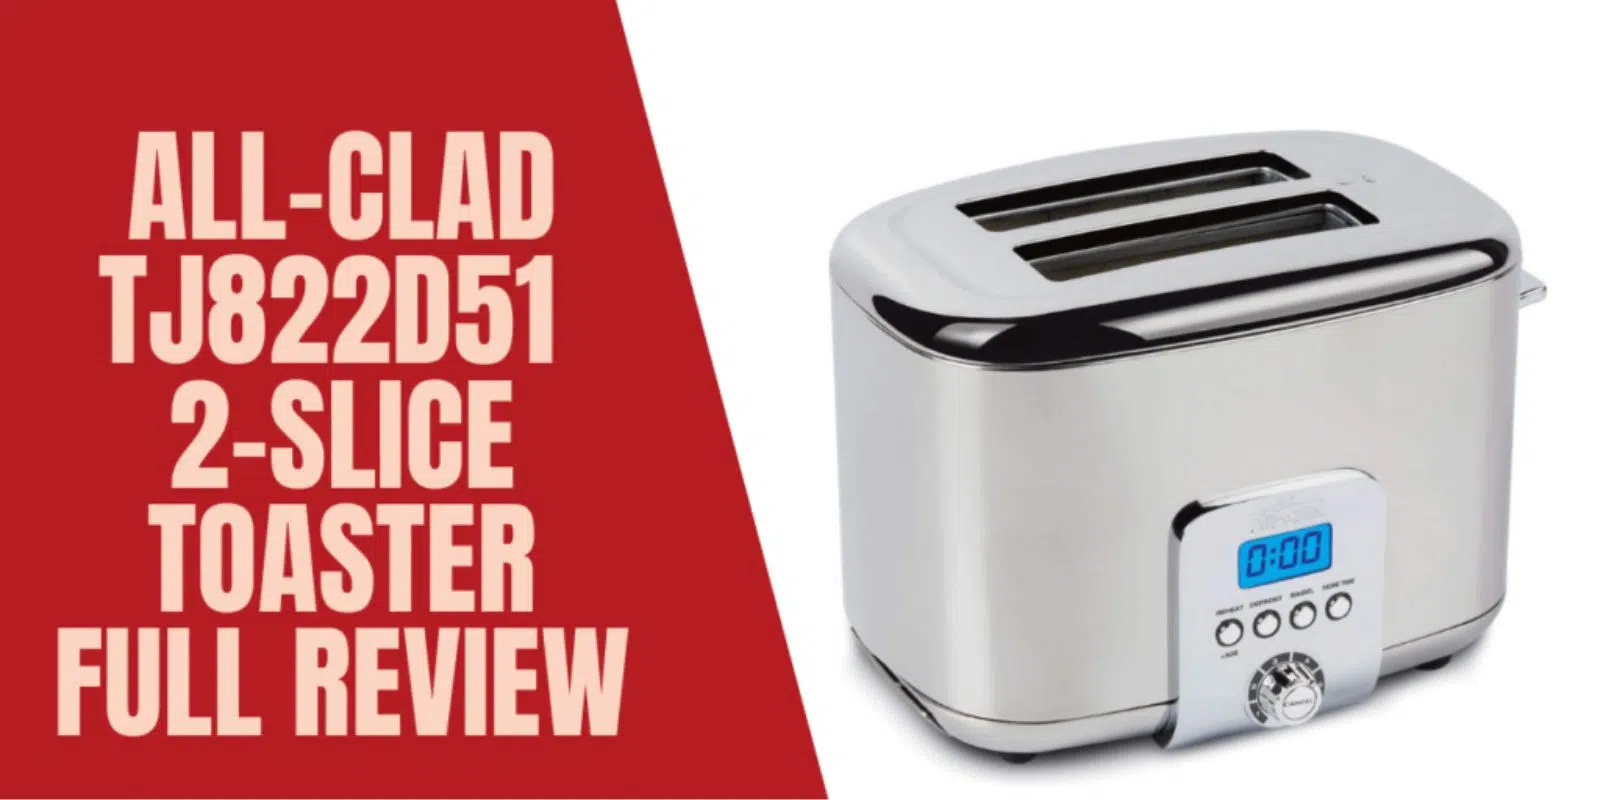 All-Clad TJ822D51 2-Slice Toaster Full Review – 2021